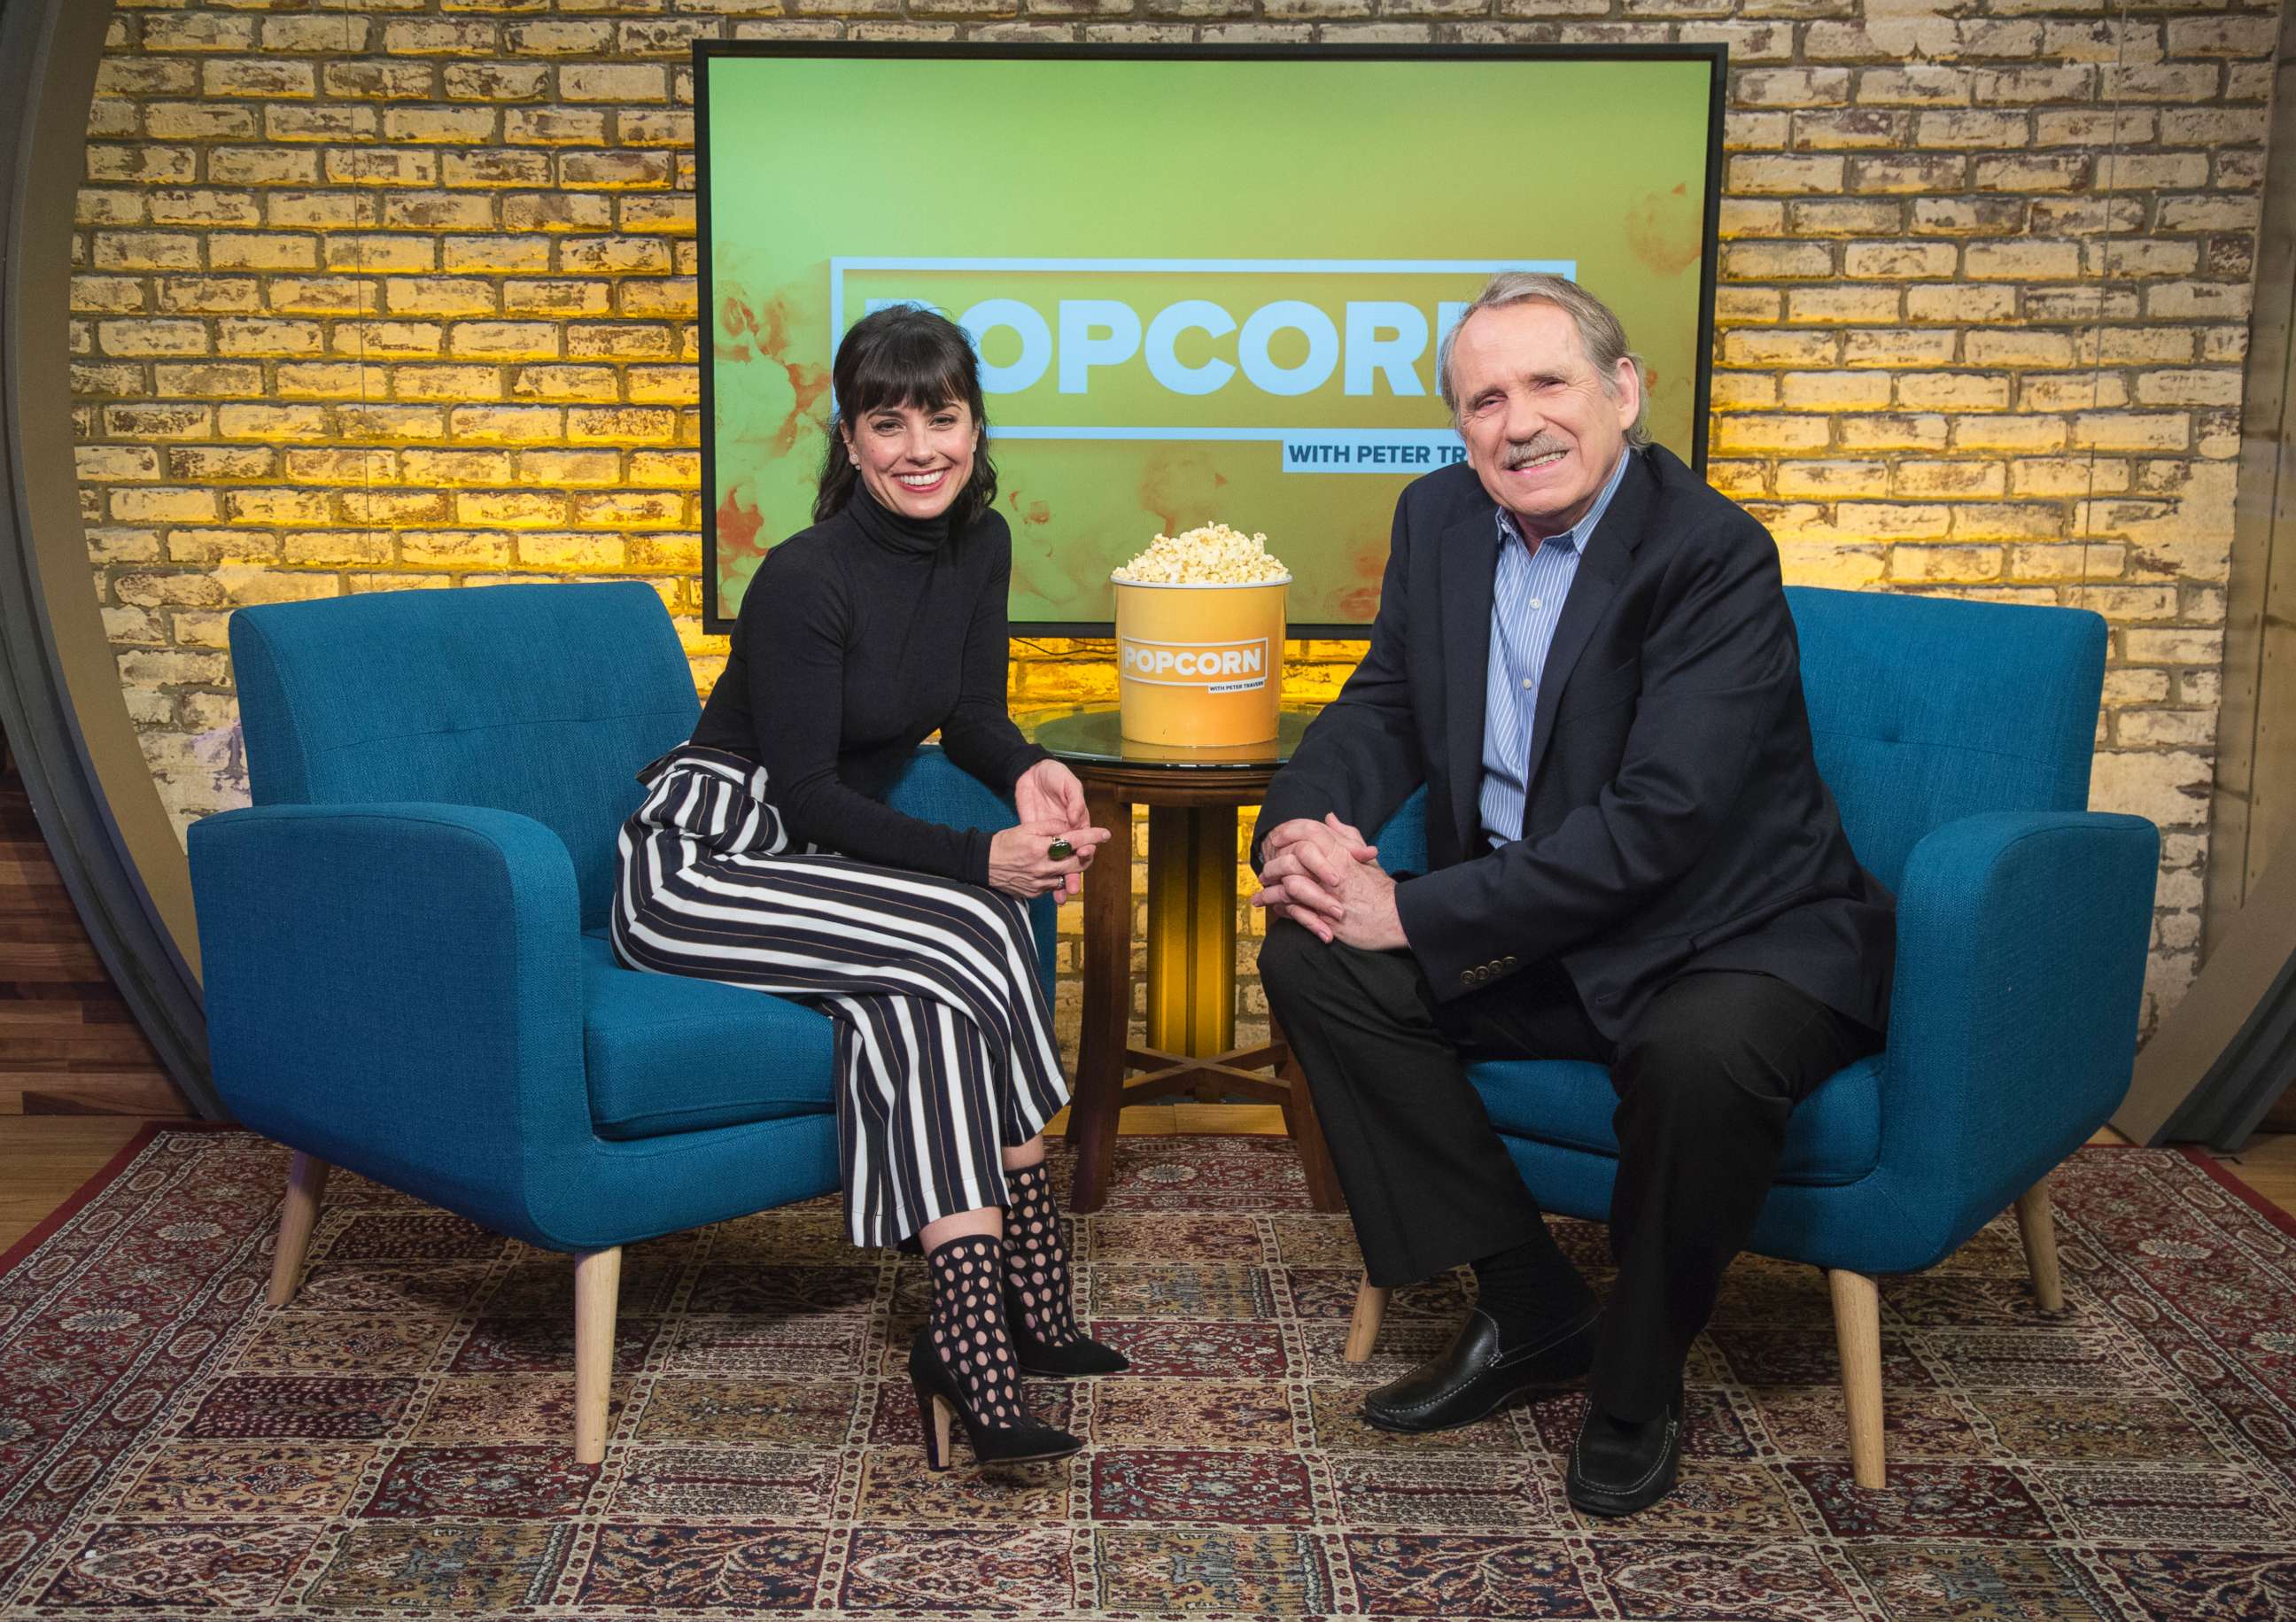 PHOTO: Constance Zimmer, who stars as Quinn King on the Lifetime series "UnREAL," appears on ABC News' "Popcorn With Peter Travers."